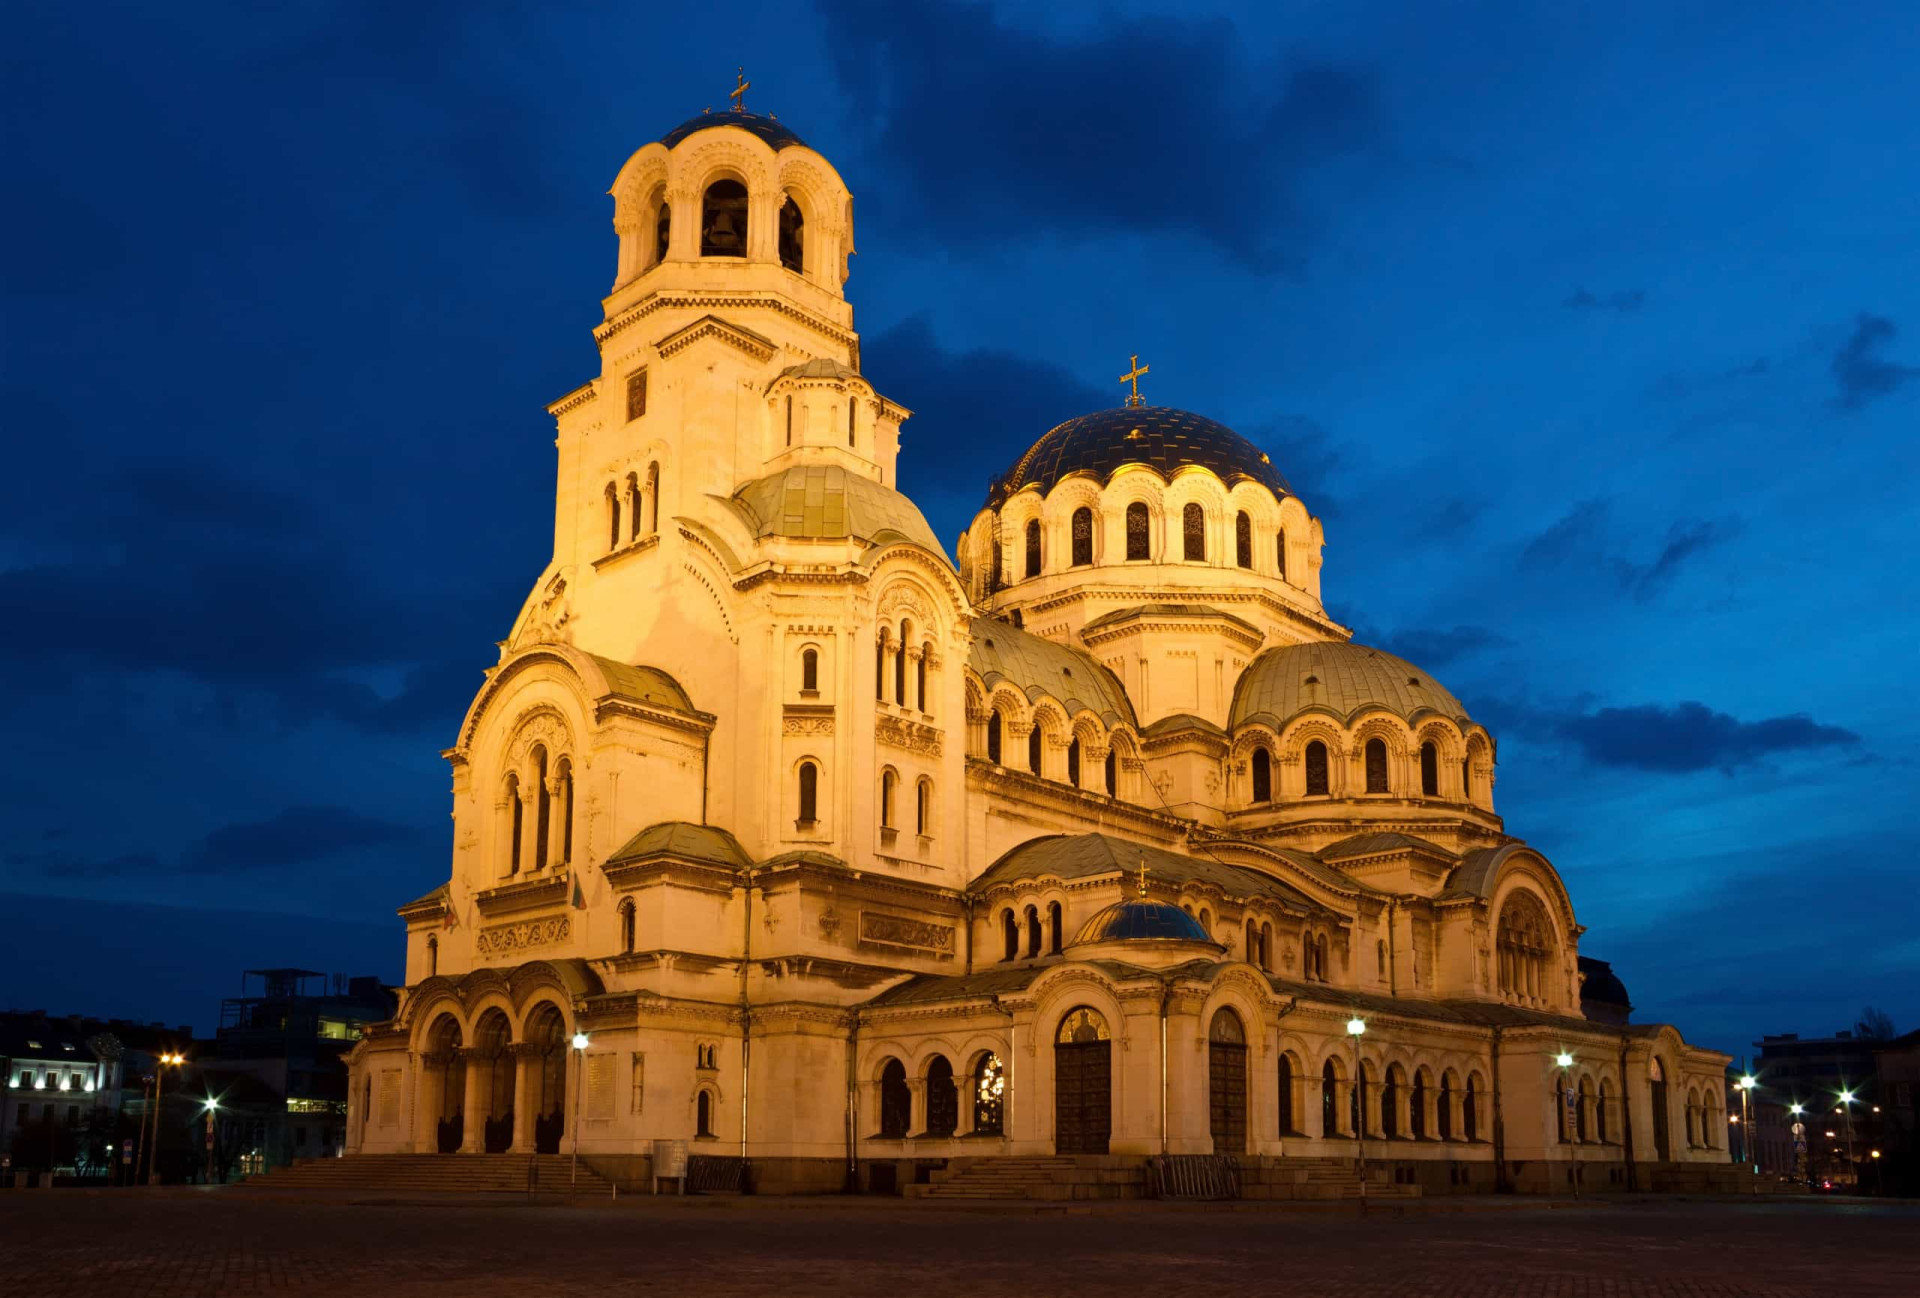 <p>The next stop in the journey is Bulgaria’s capital, Sofia, which is known for its mineral springs and humid continental climate. Reaching the city requires an hour-long flight, which means that the clock is ticking closer to the 24-hour mark.</p><p><a href="https://www.msn.com/en-us/community/channel/vid-7xx8mnucu55yw63we9va2gwr7uihbxwc68fxqp25x6tg4ftibpra?cvid=94631541bc0f4f89bfd59158d696ad7e">Follow us and access great exclusive content every day</a></p>